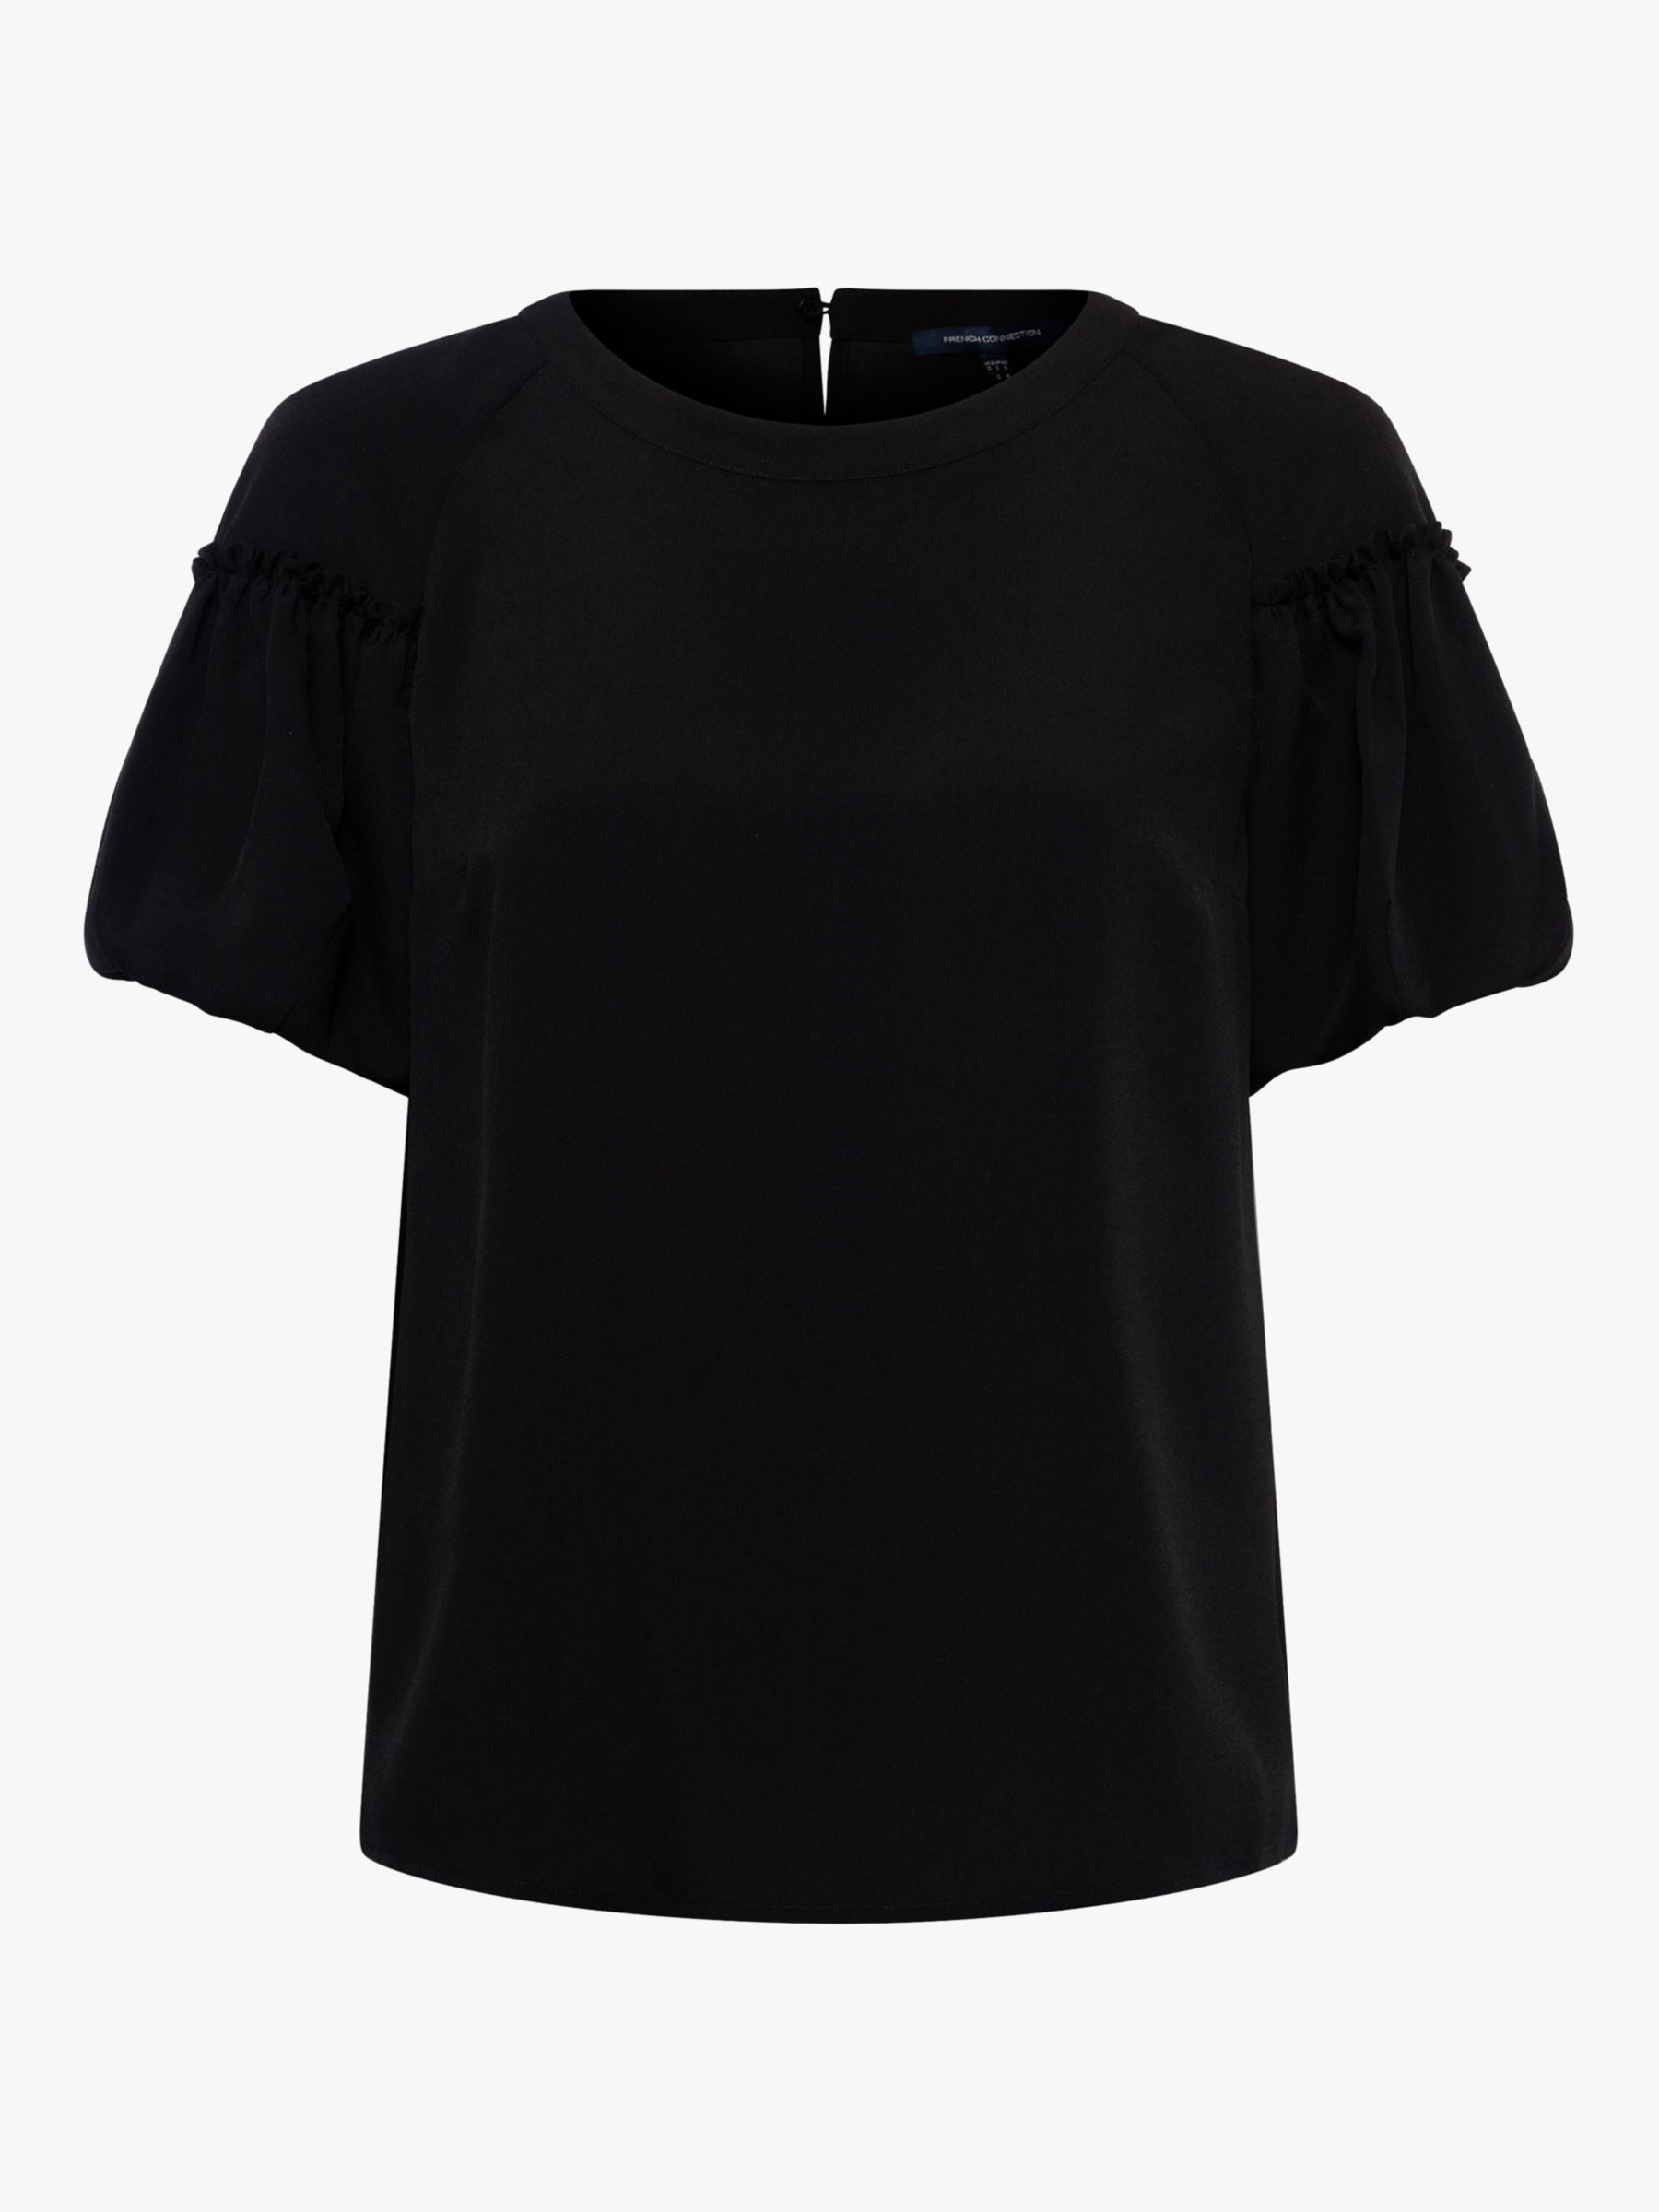 French Connection Light Crepe Top, Black at John Lewis & Partners